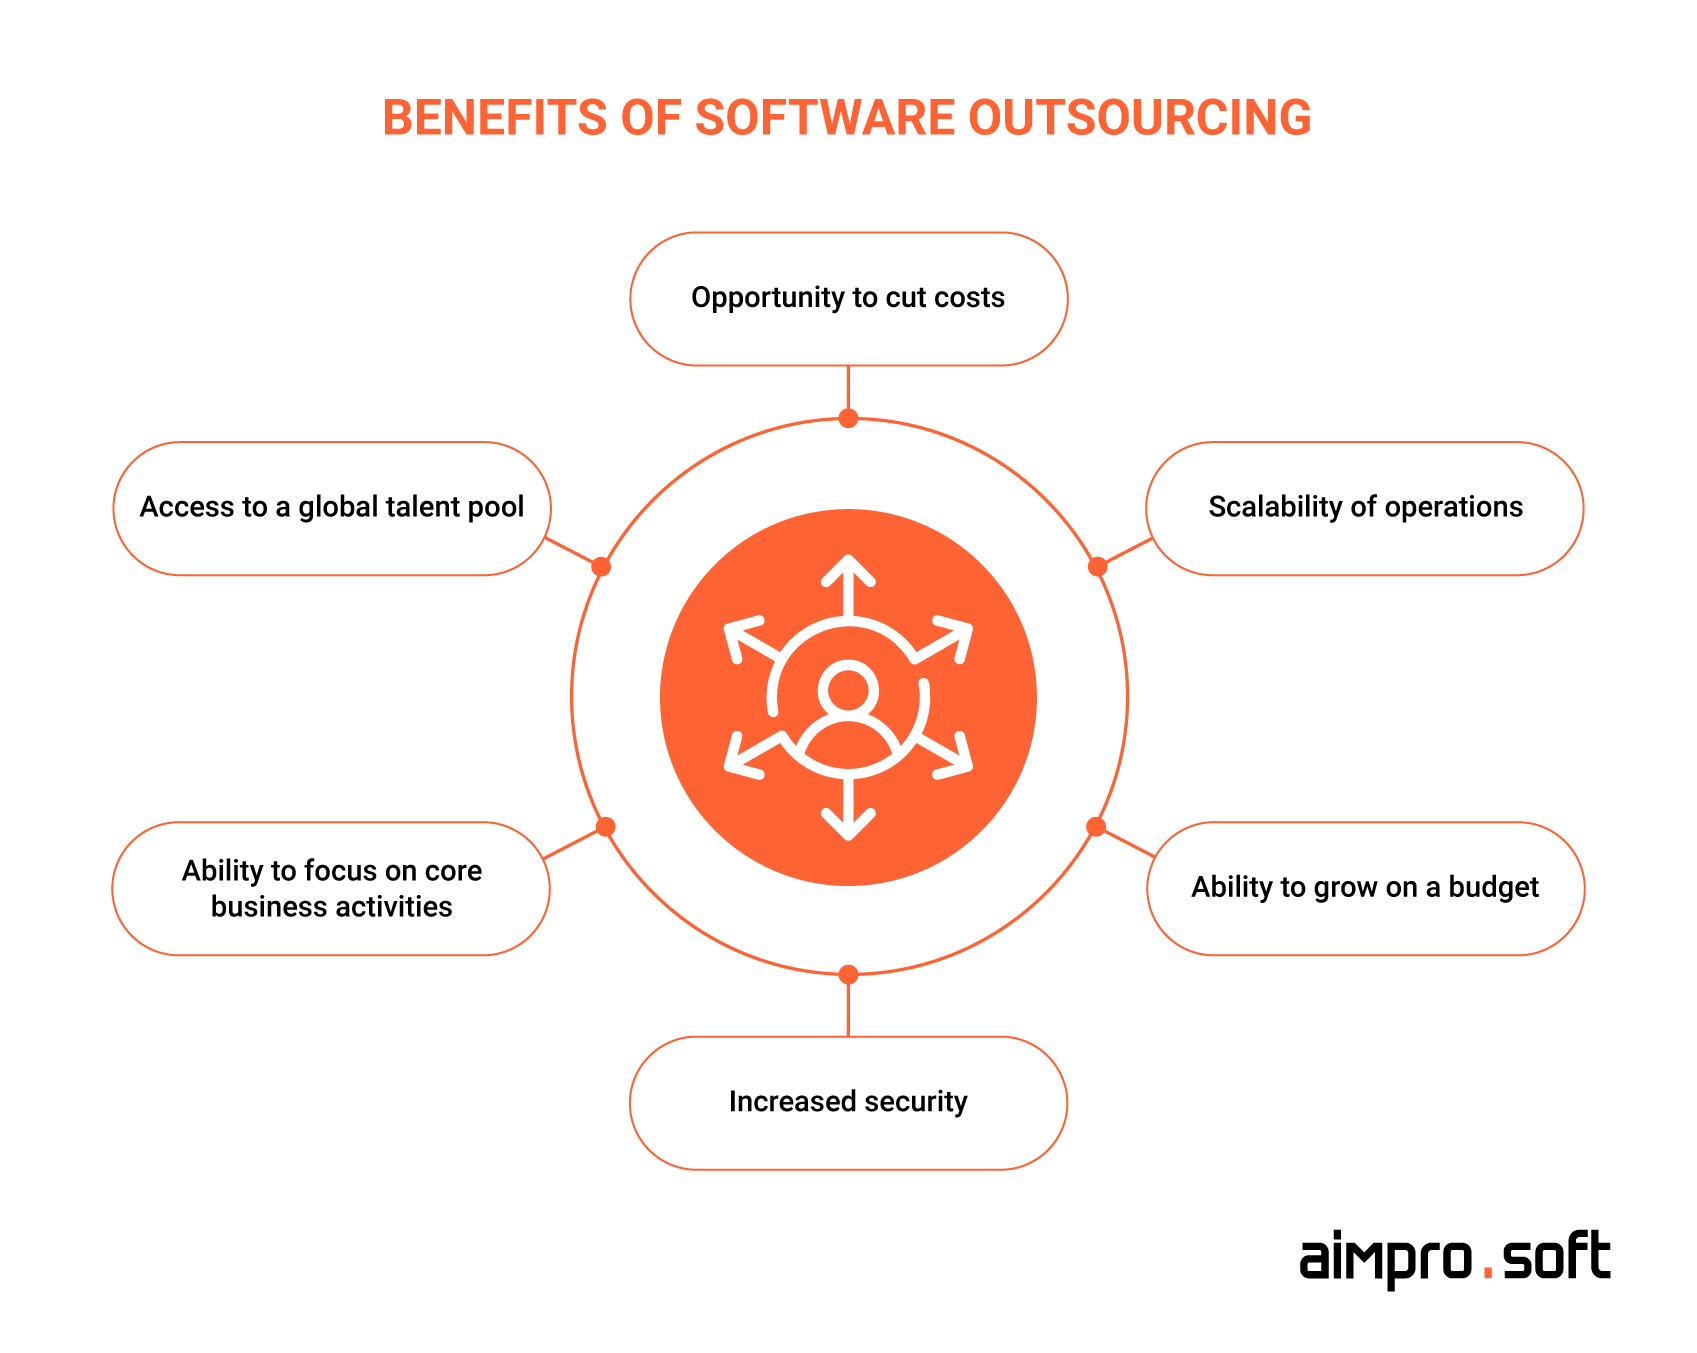 Benefits of software outsourcing